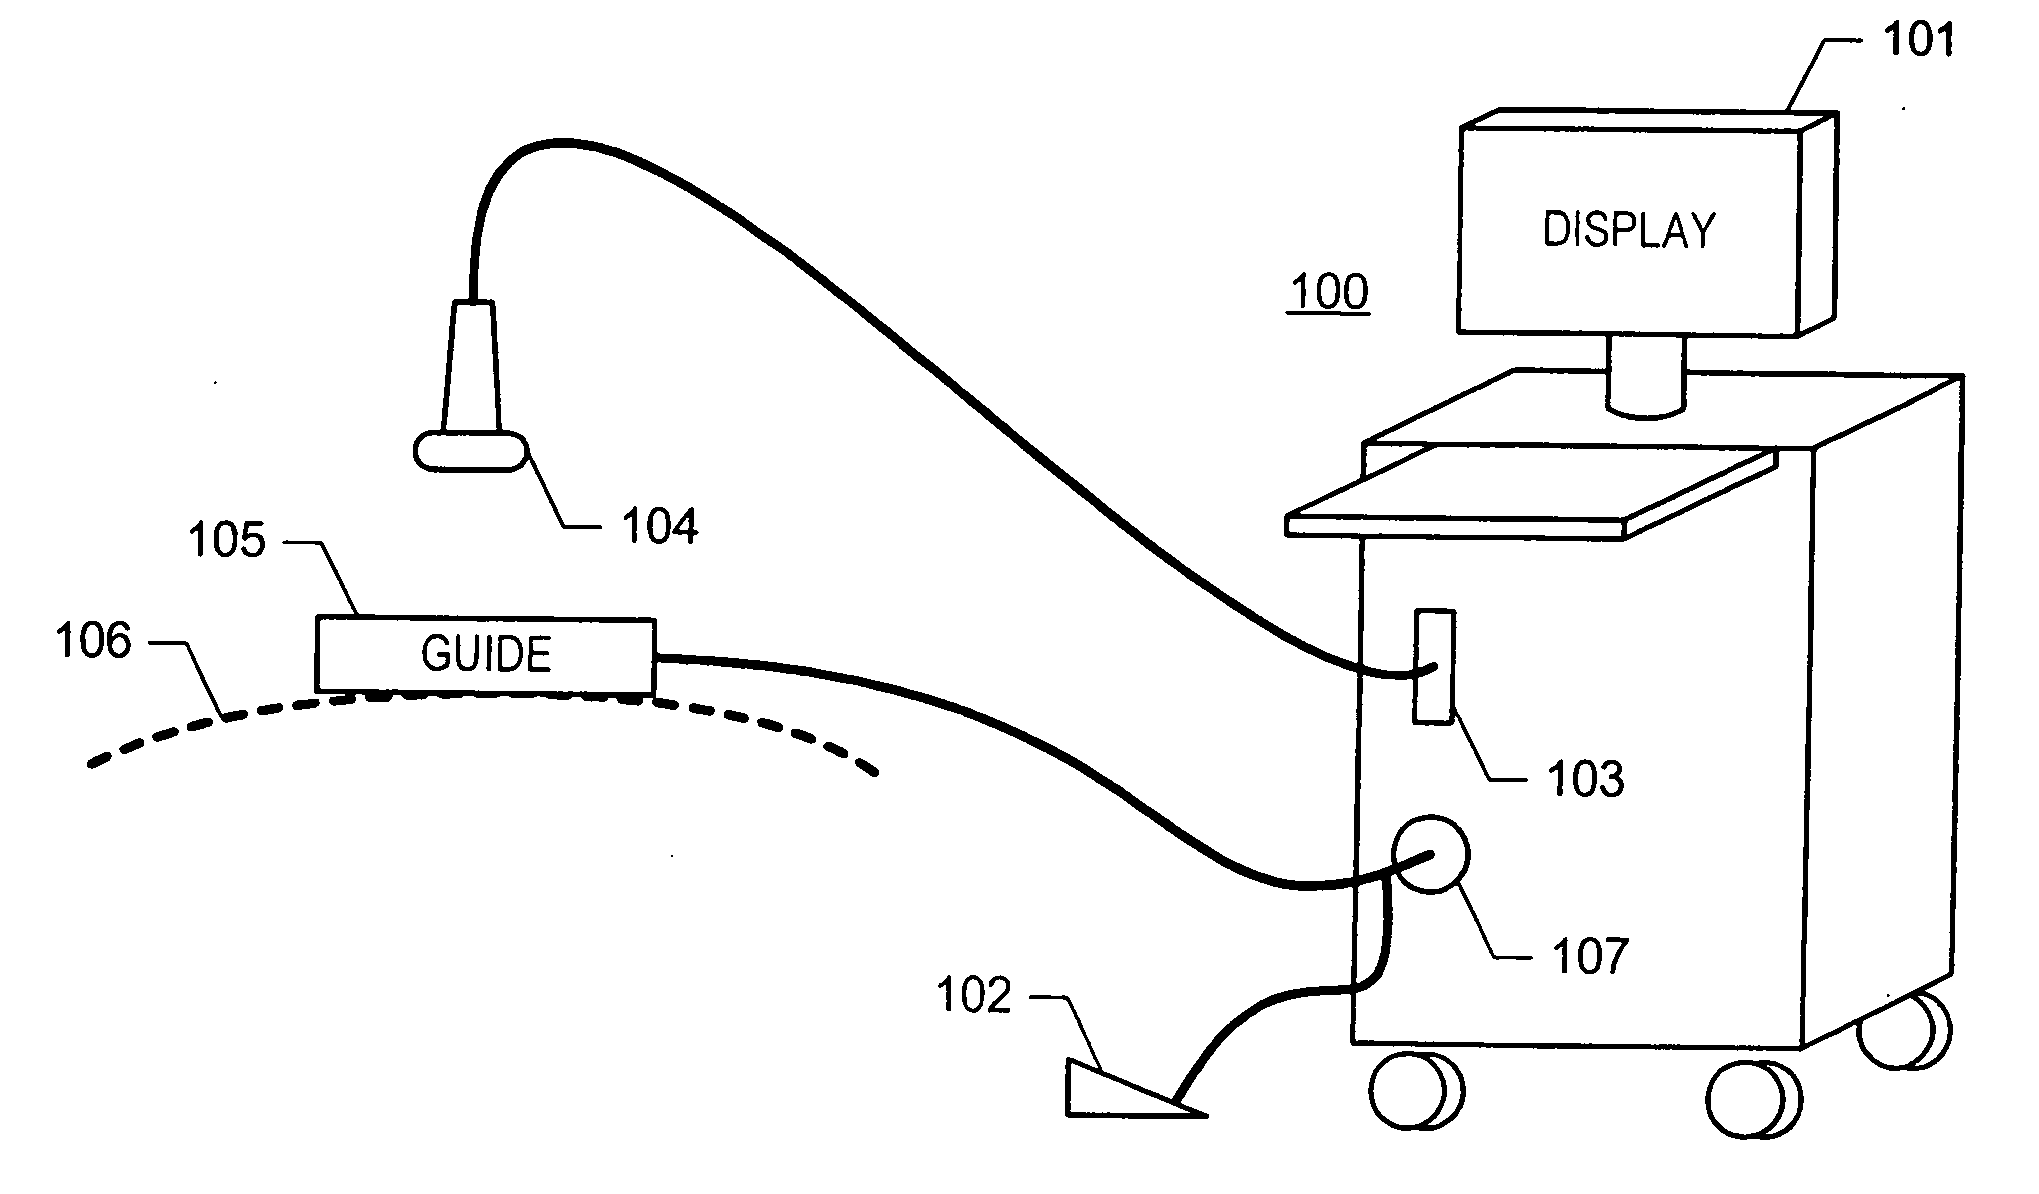 Ultrasound image acquisition guiding device and method